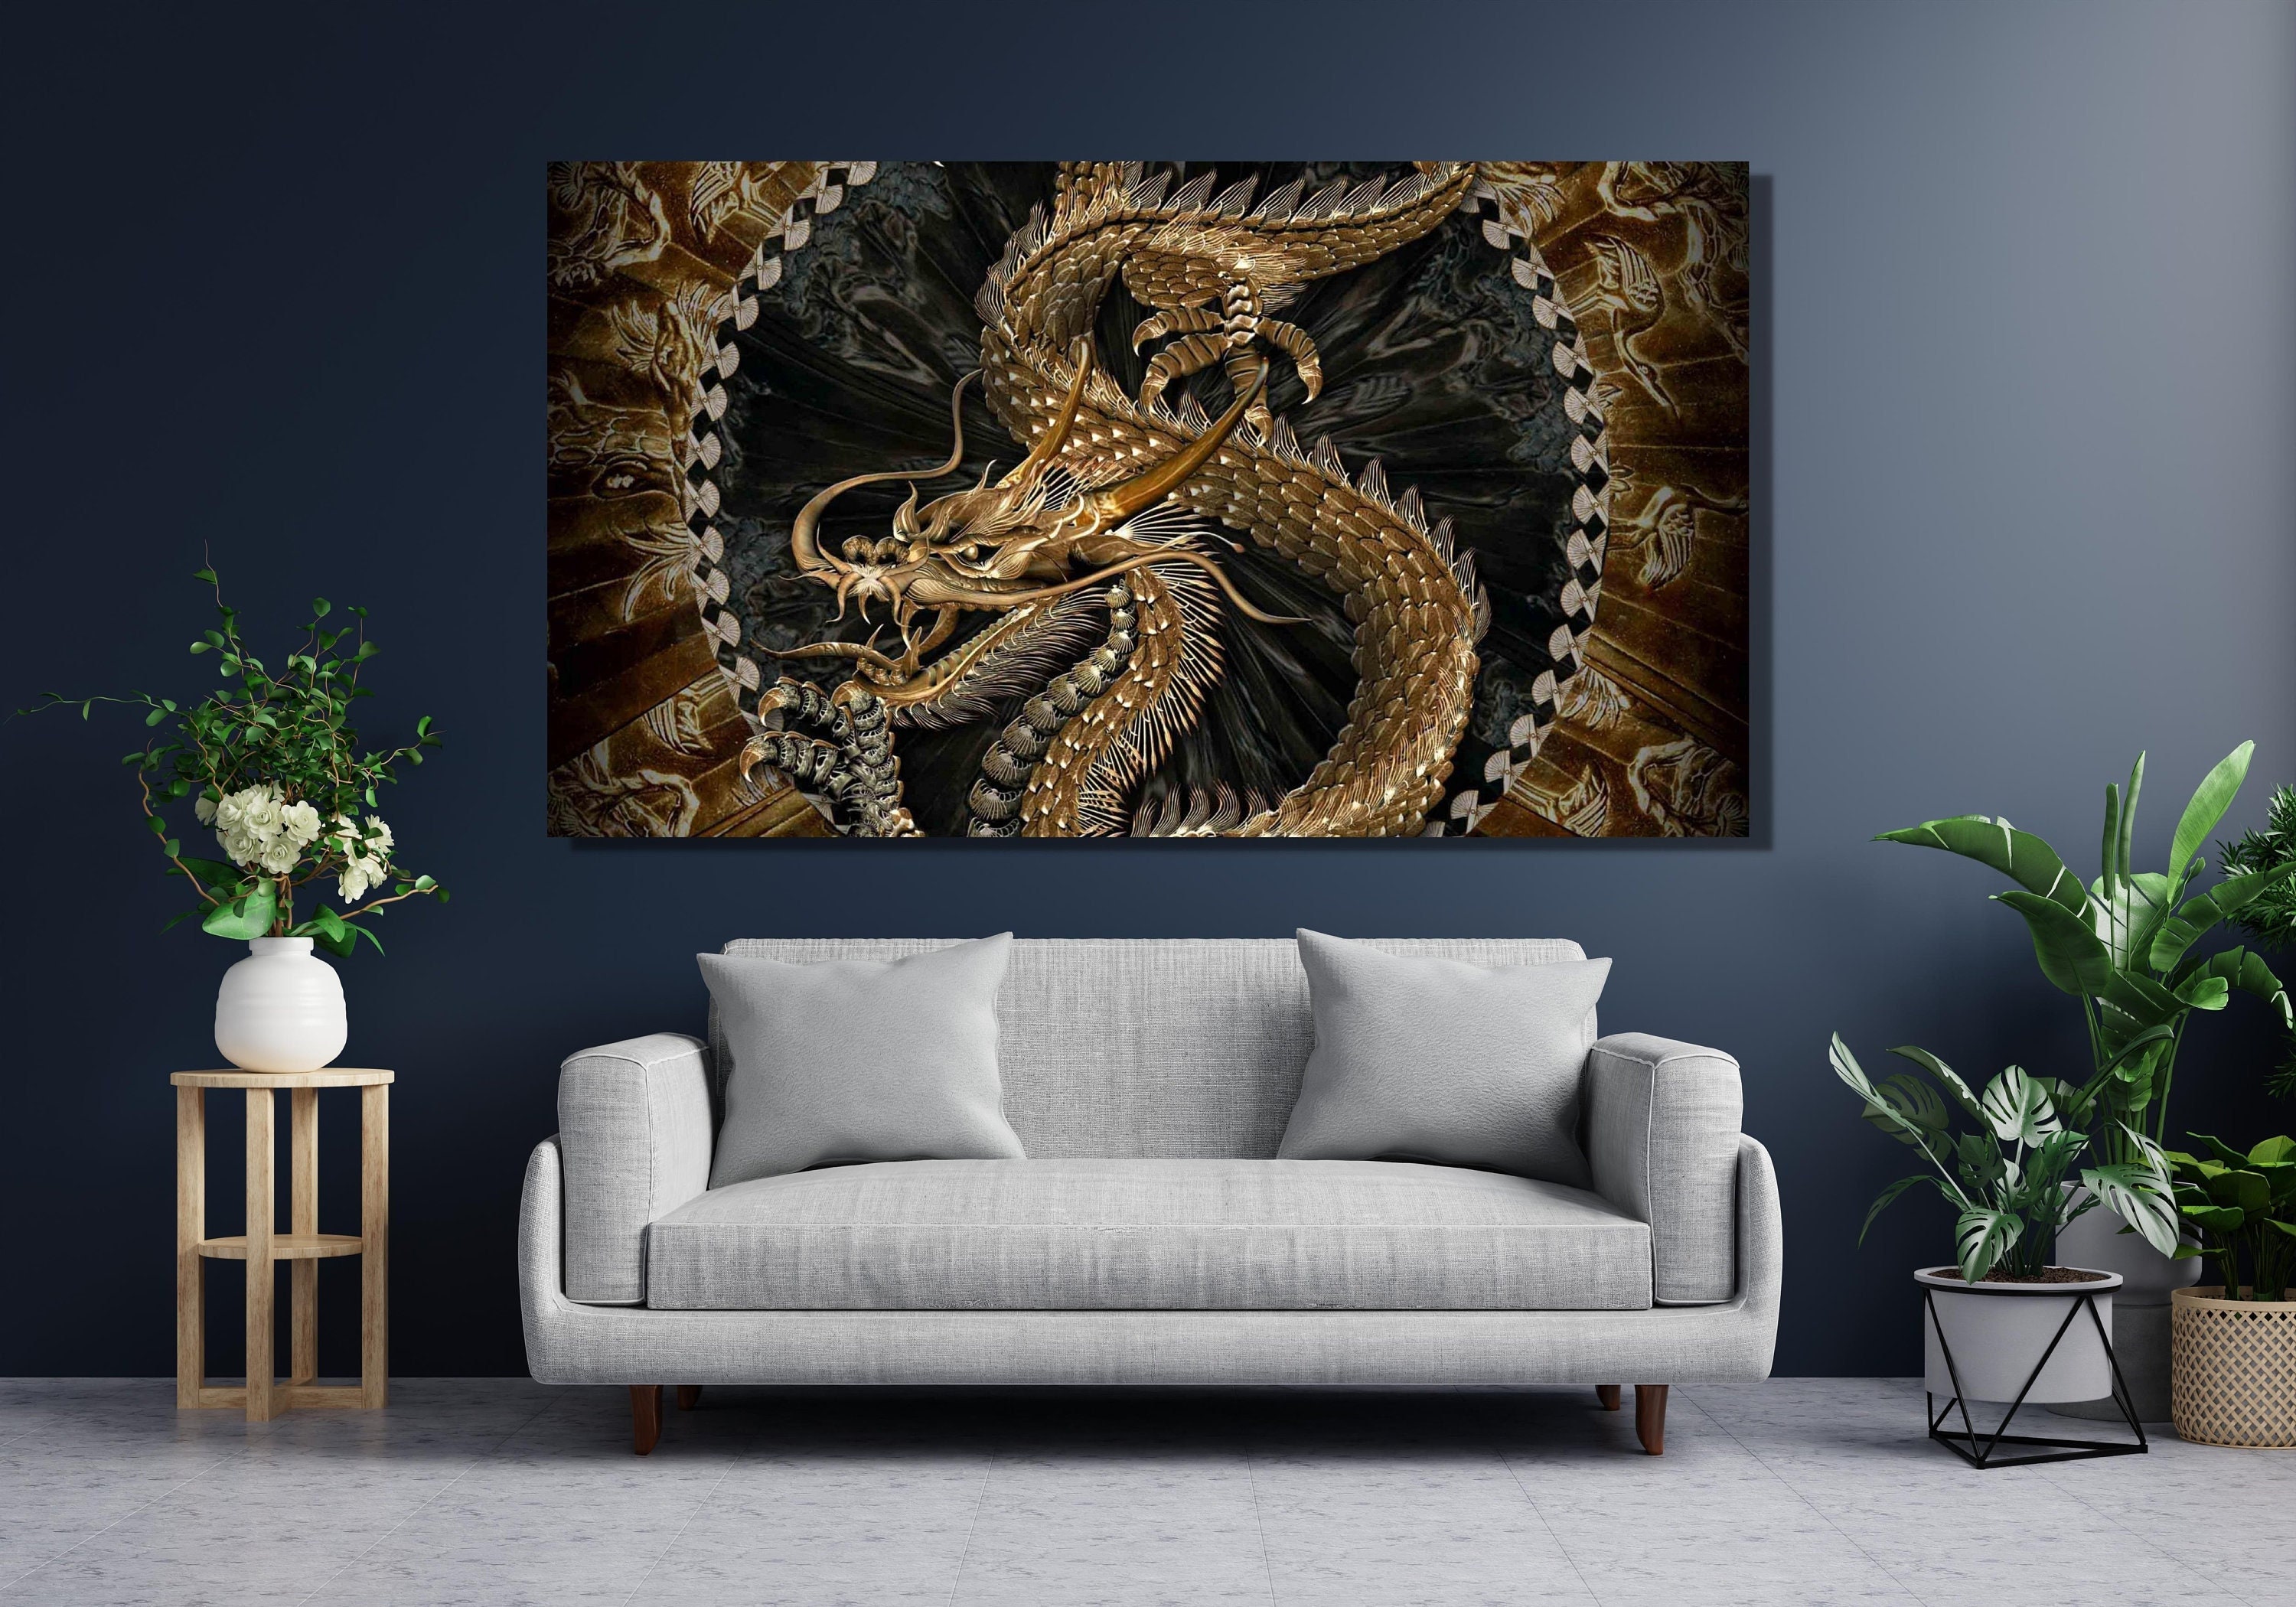 DIARQT Decorative paintings Pictures For Living Room Home Decorative Ship And Black Dragon Painting Modern Wall Picture Wall art painting-16x24inch 